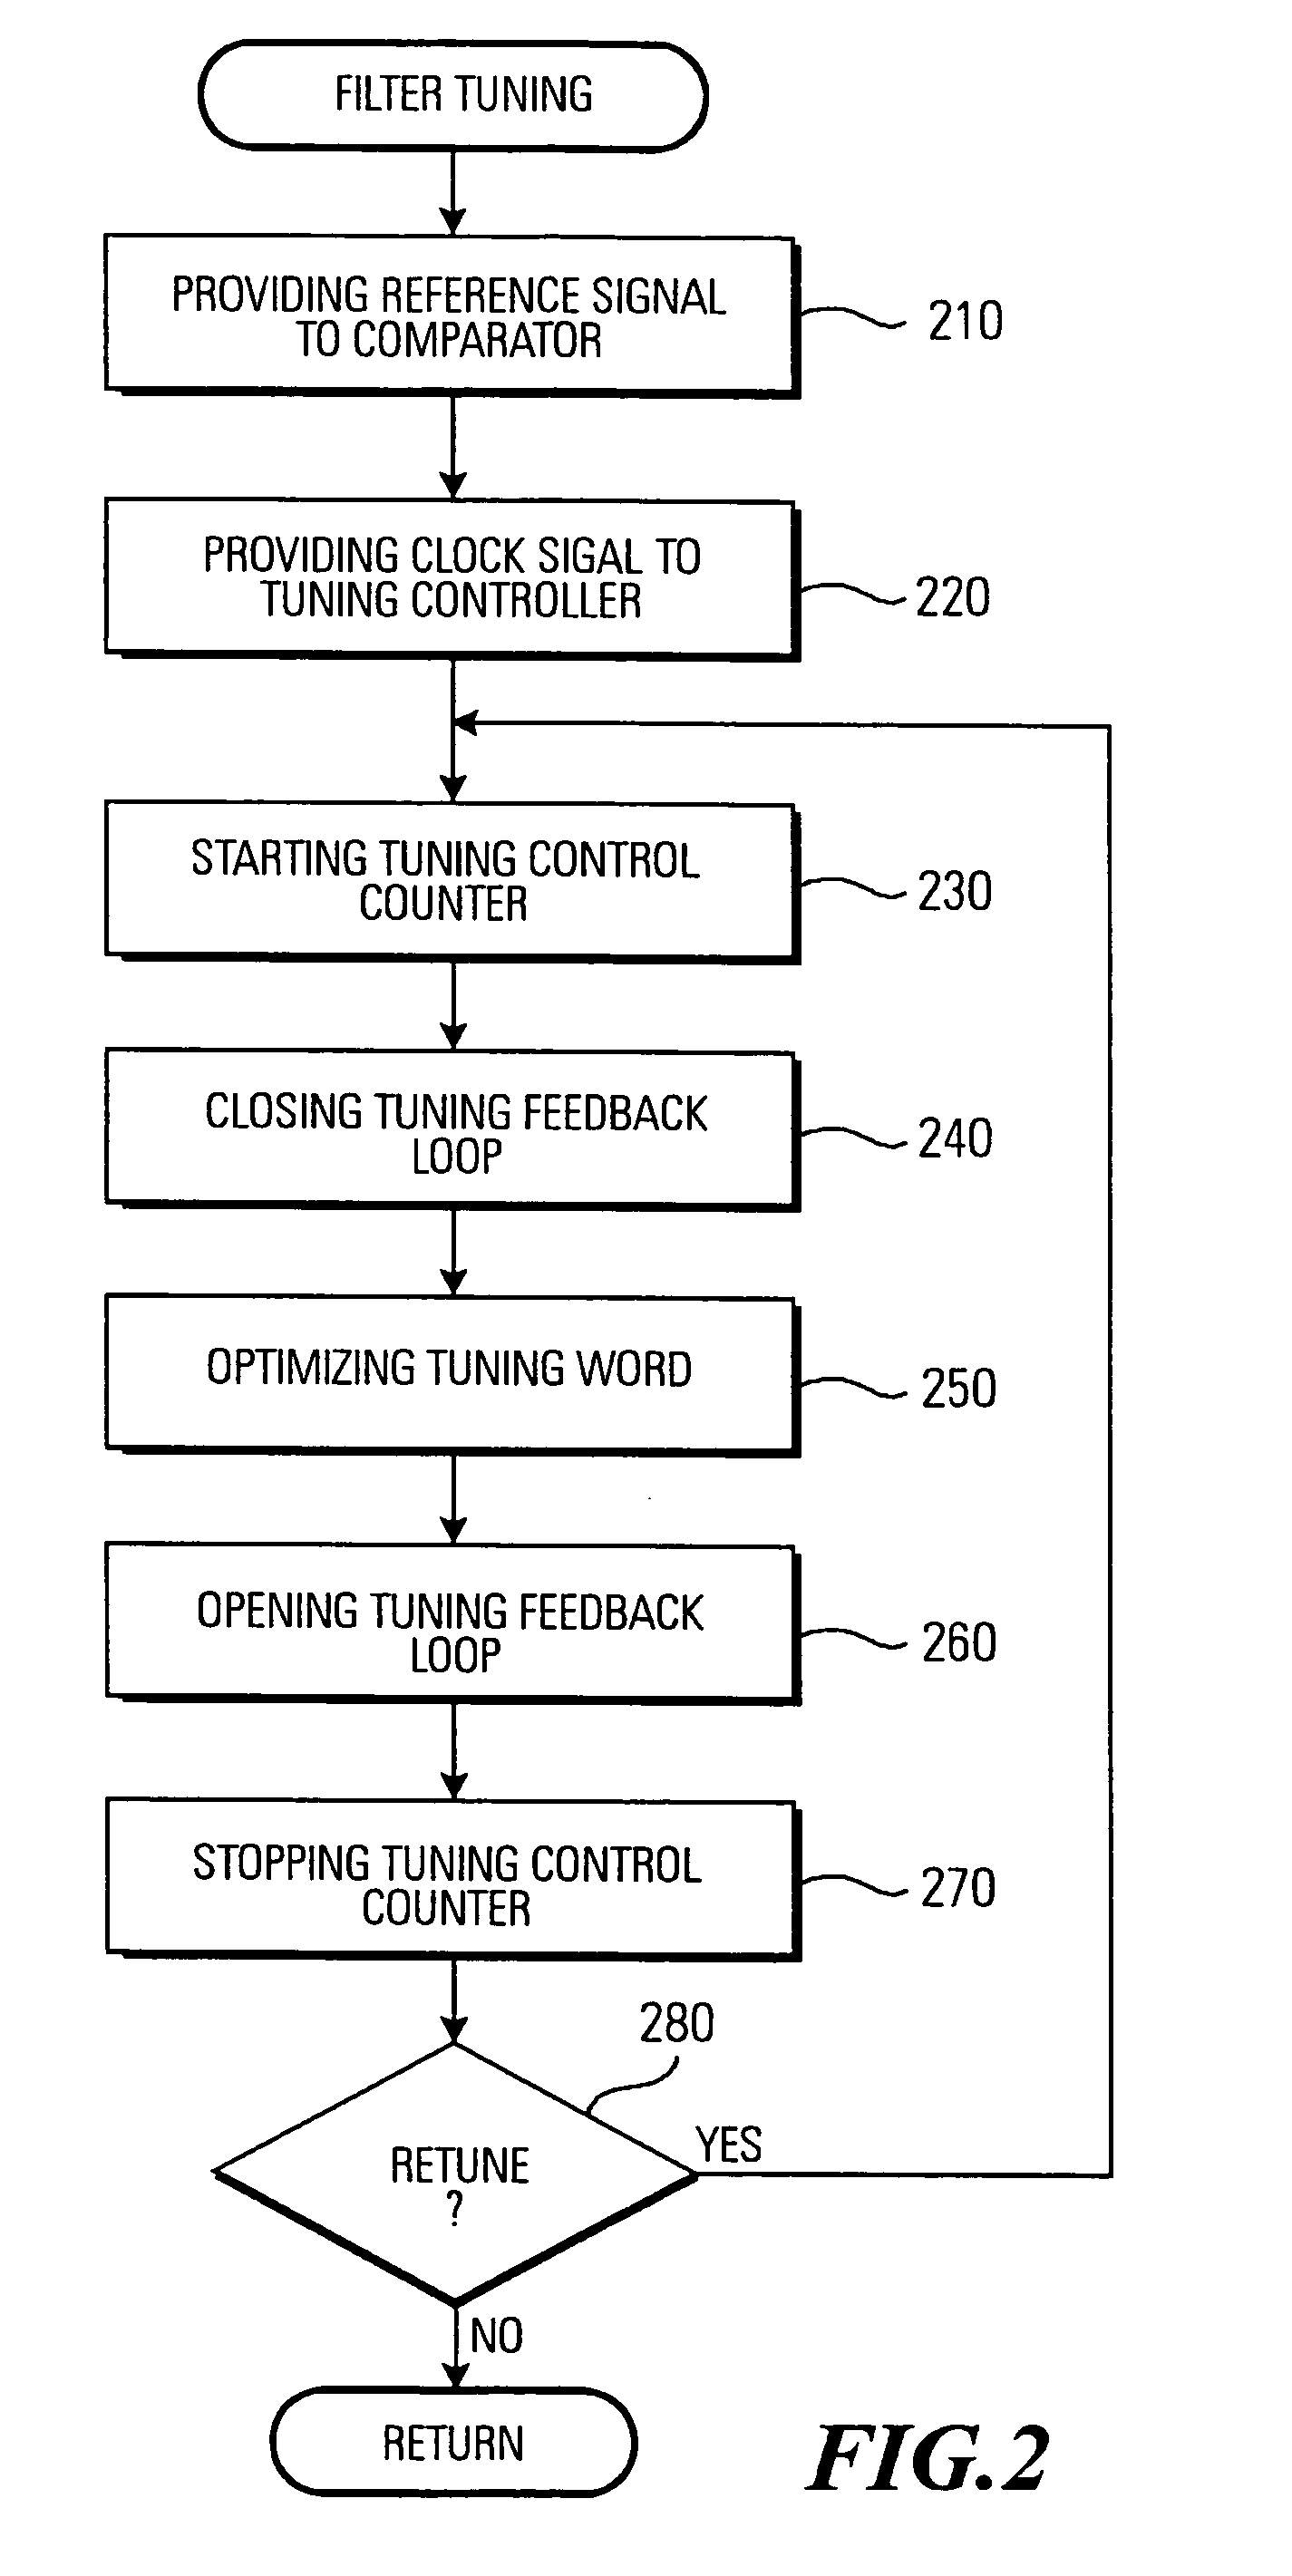 Digitally controlled filter tuning for WLAN communication devices